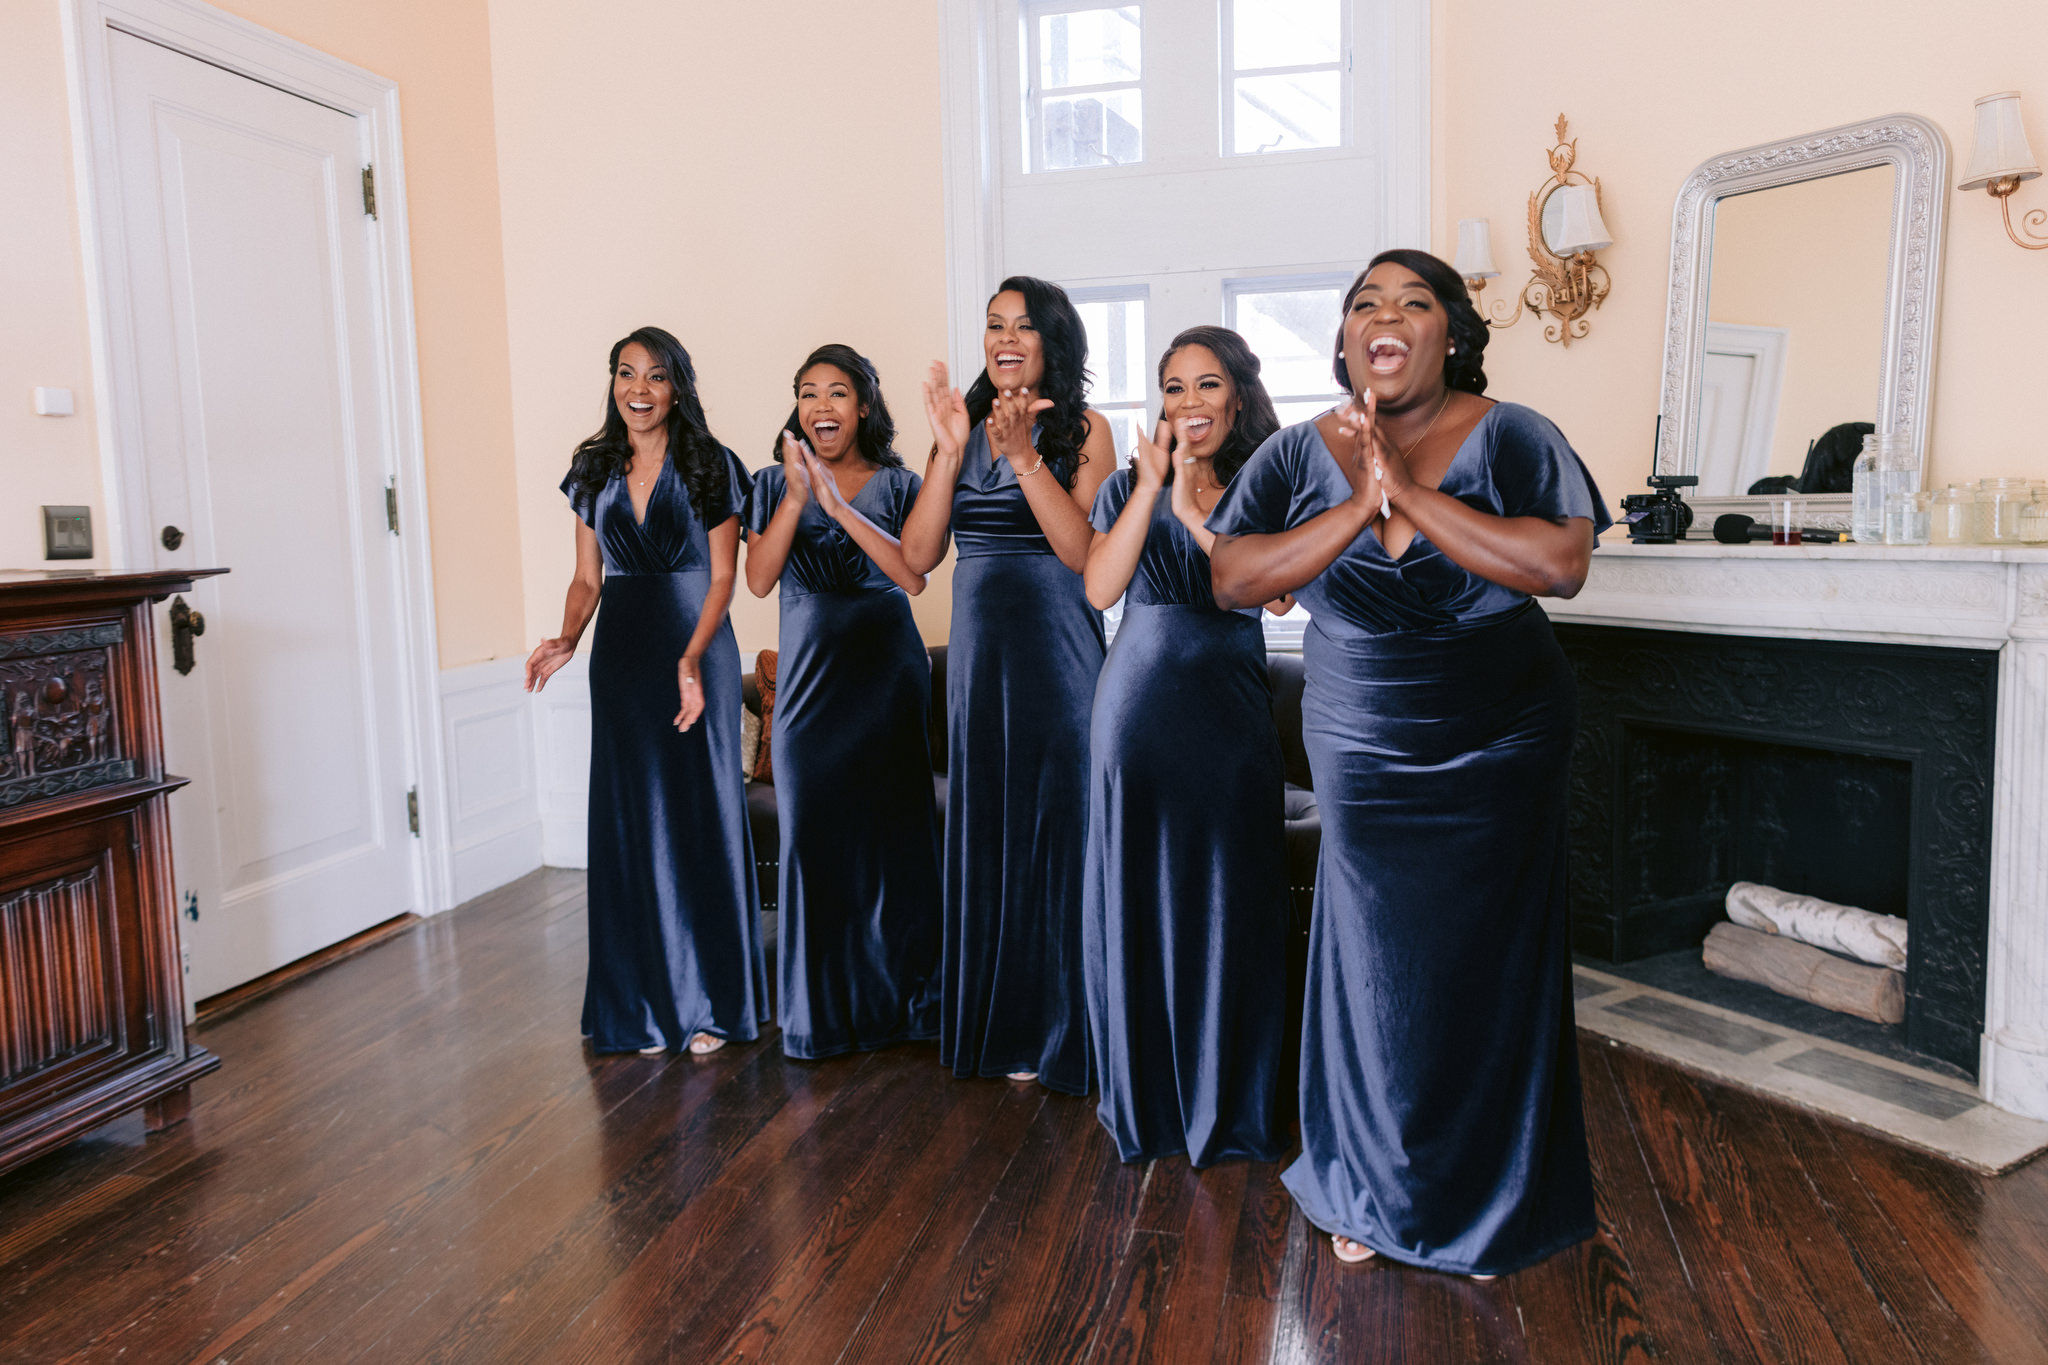 Bridesmaids smiling and clapping wearing navy blue floor length dresses